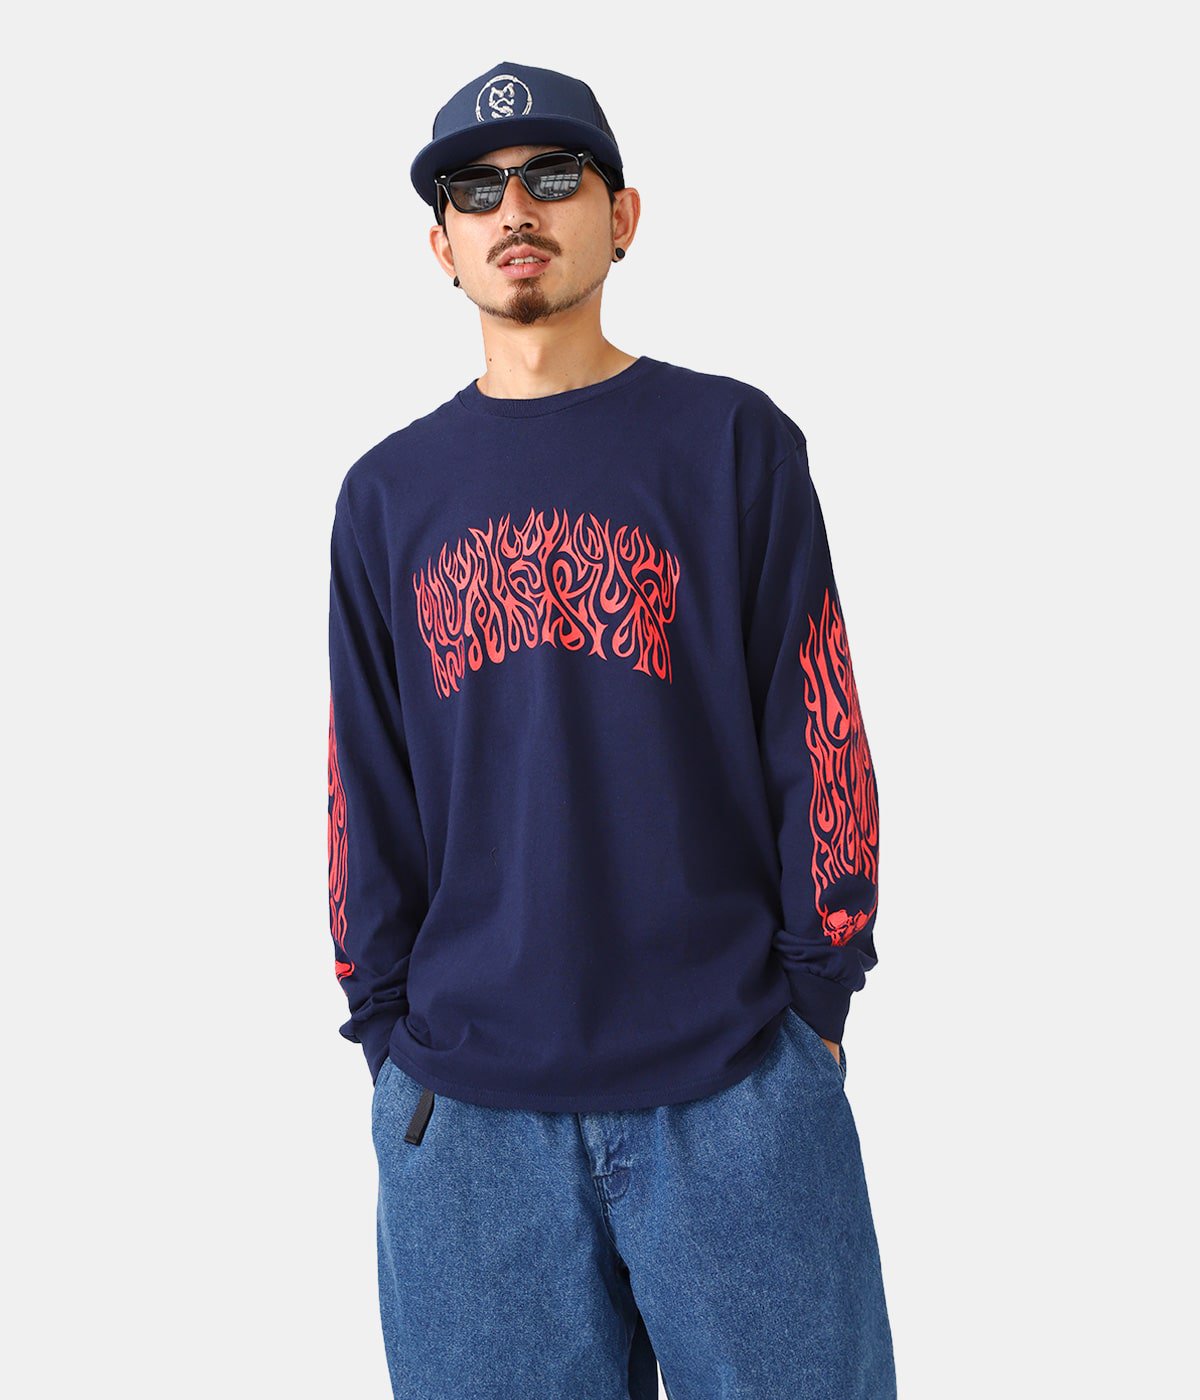 T-SHIRT L/S FLAME2 | MASSES(マシス) / トップス カットソー長袖